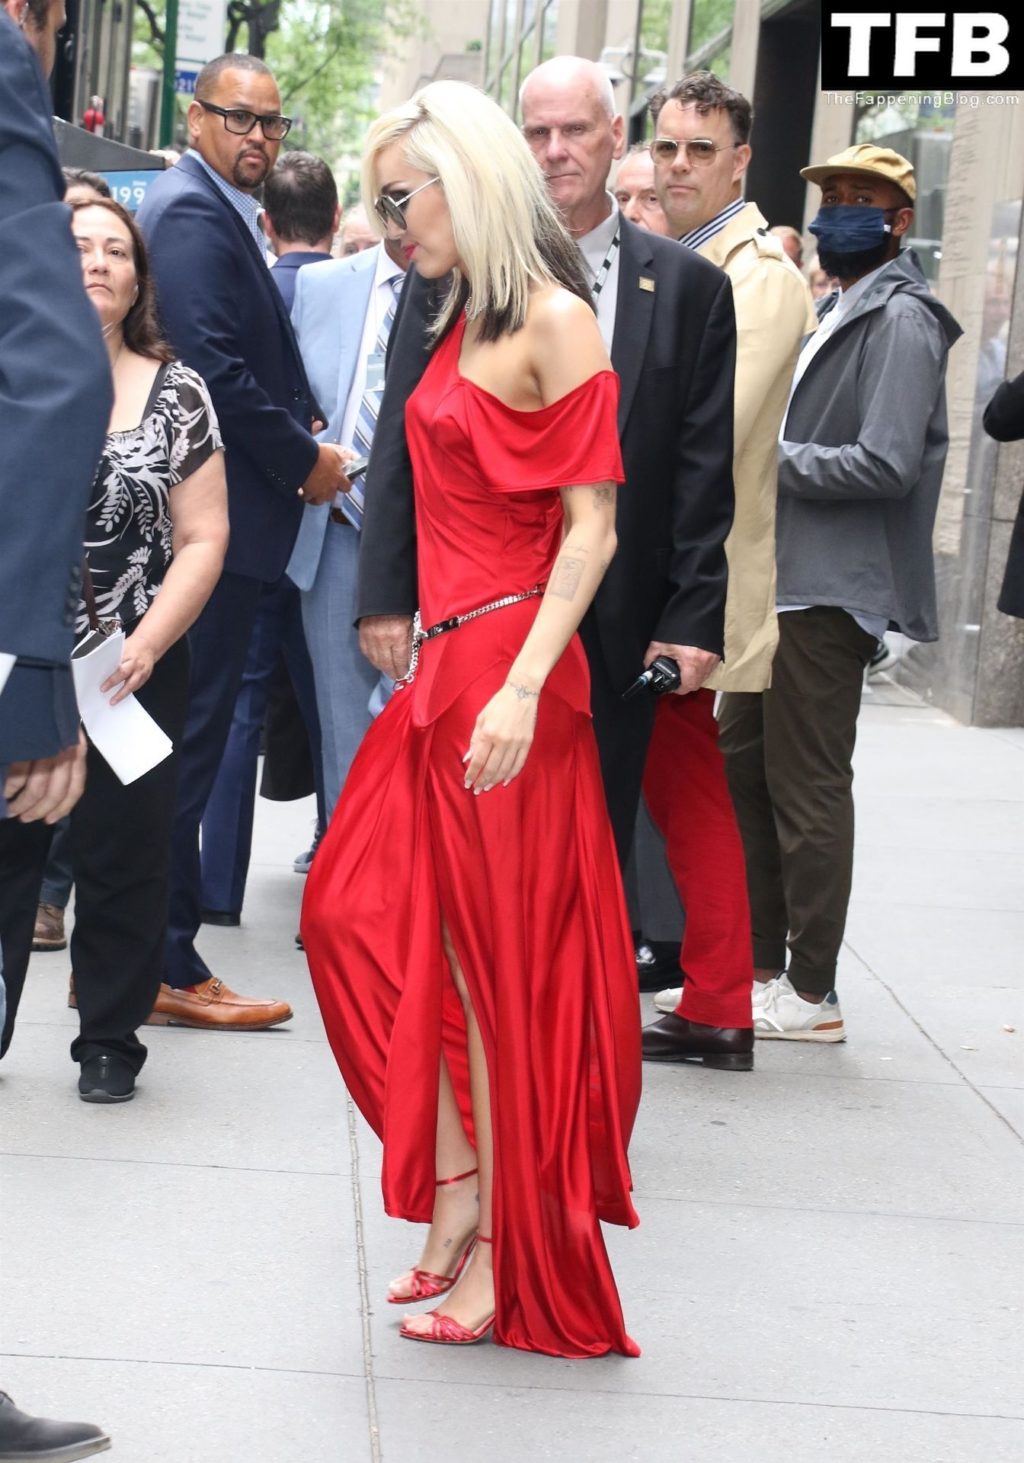 Miley Cyrus Looks Hot in Red as She Attends the 2022 NBCUniversal Upfront in New York (5 Photos)